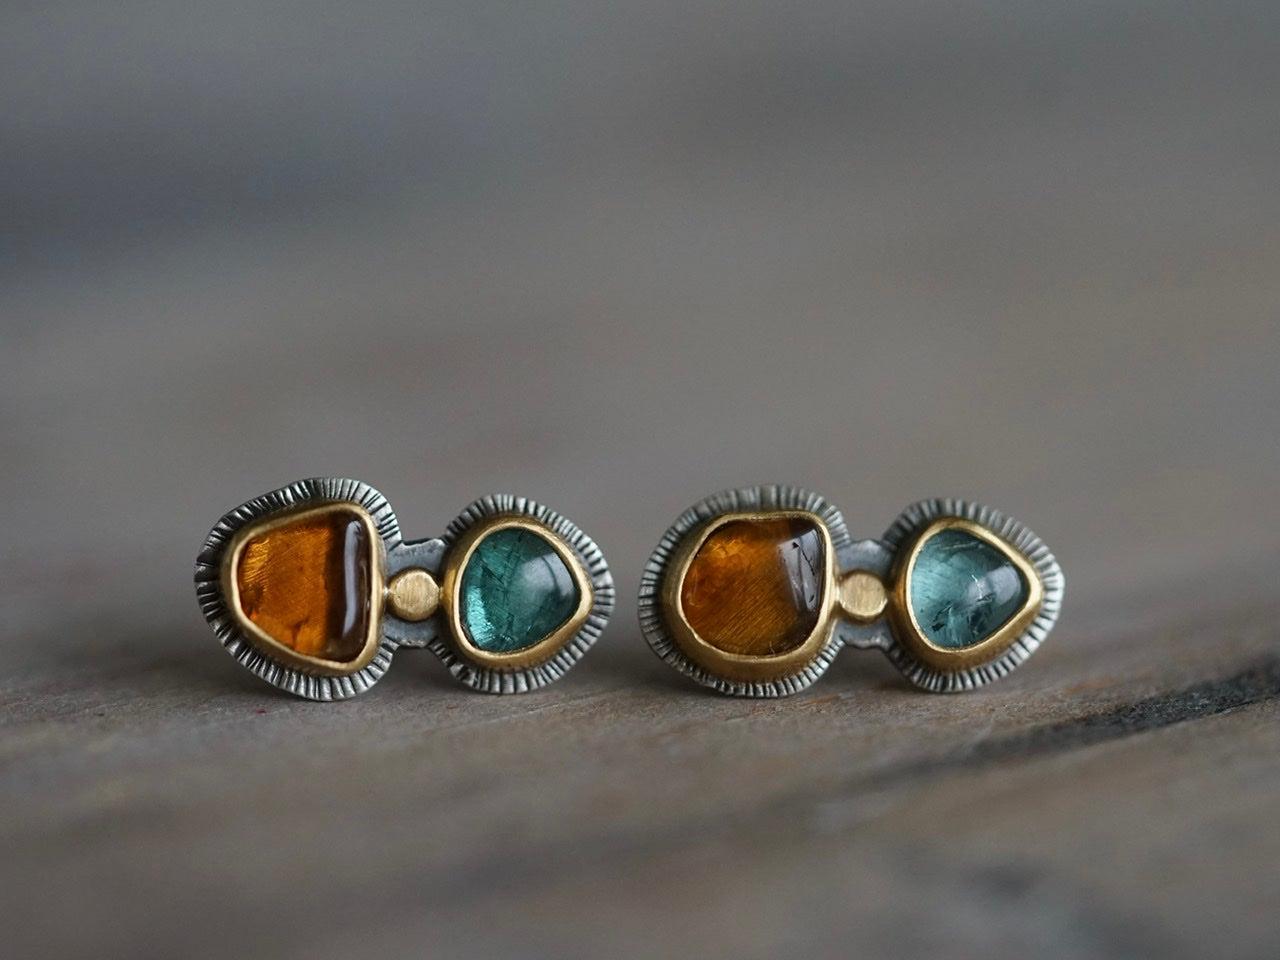 Teal and ochre tourmaline in 22k gold post earrings